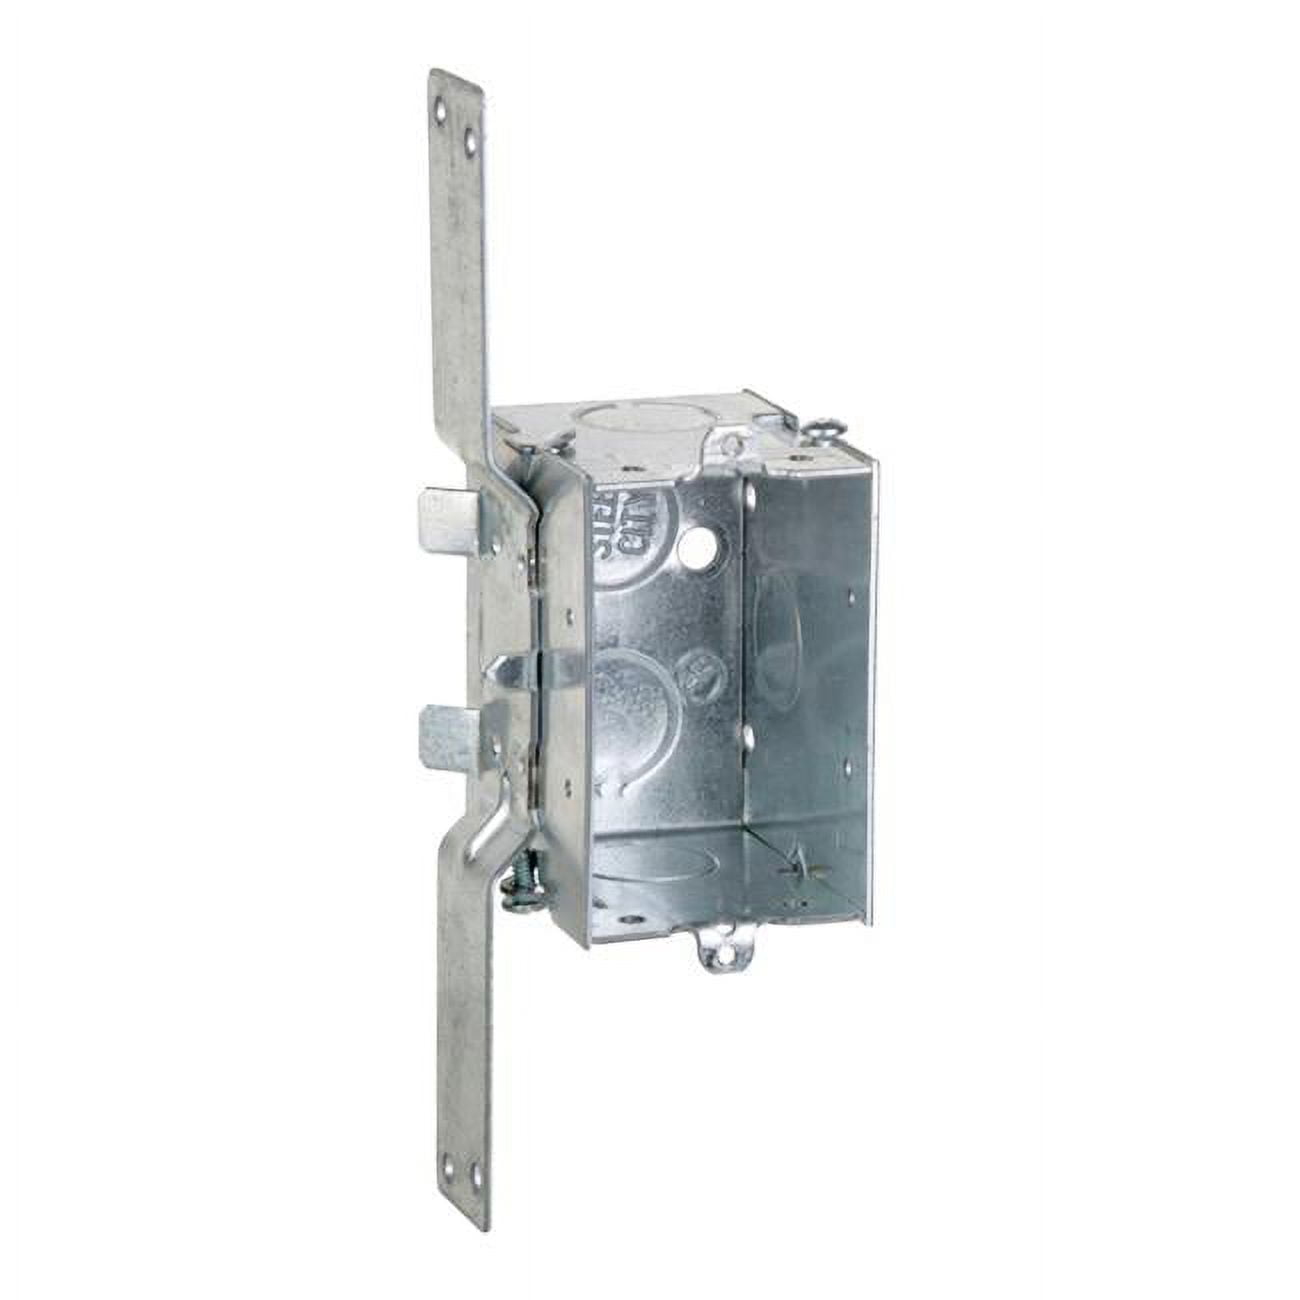 3822202 3 In. Rectangle Galvanized Steel 1 Gang Switch Box, Silver